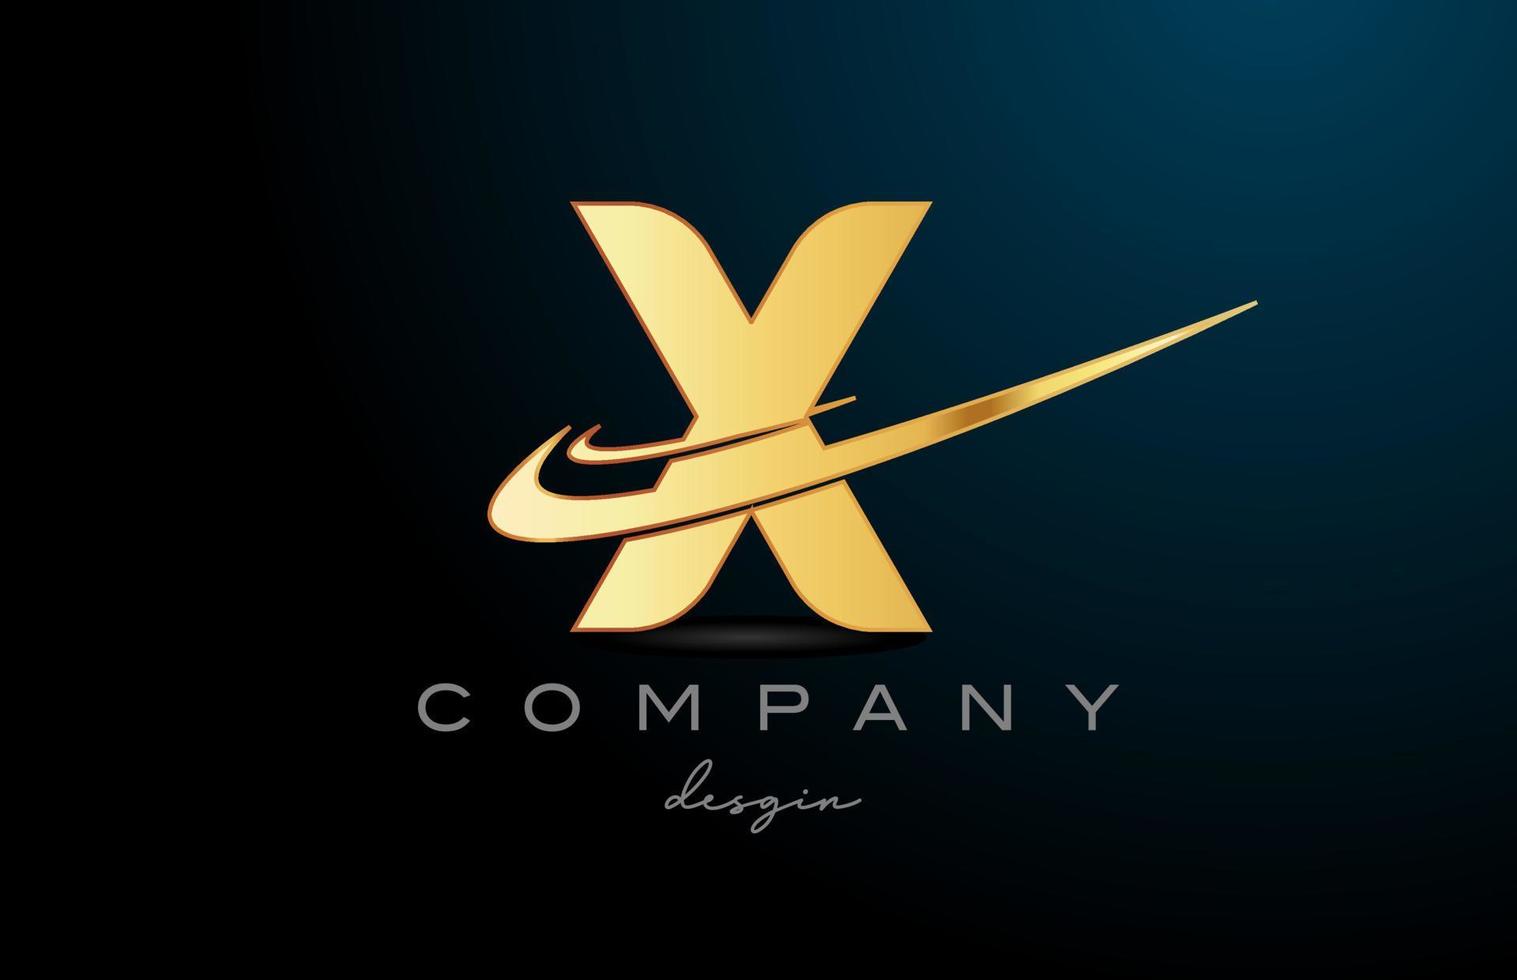 X alphabet letter logo with double swoosh in gold golden color. Corporate creative template design for company vector